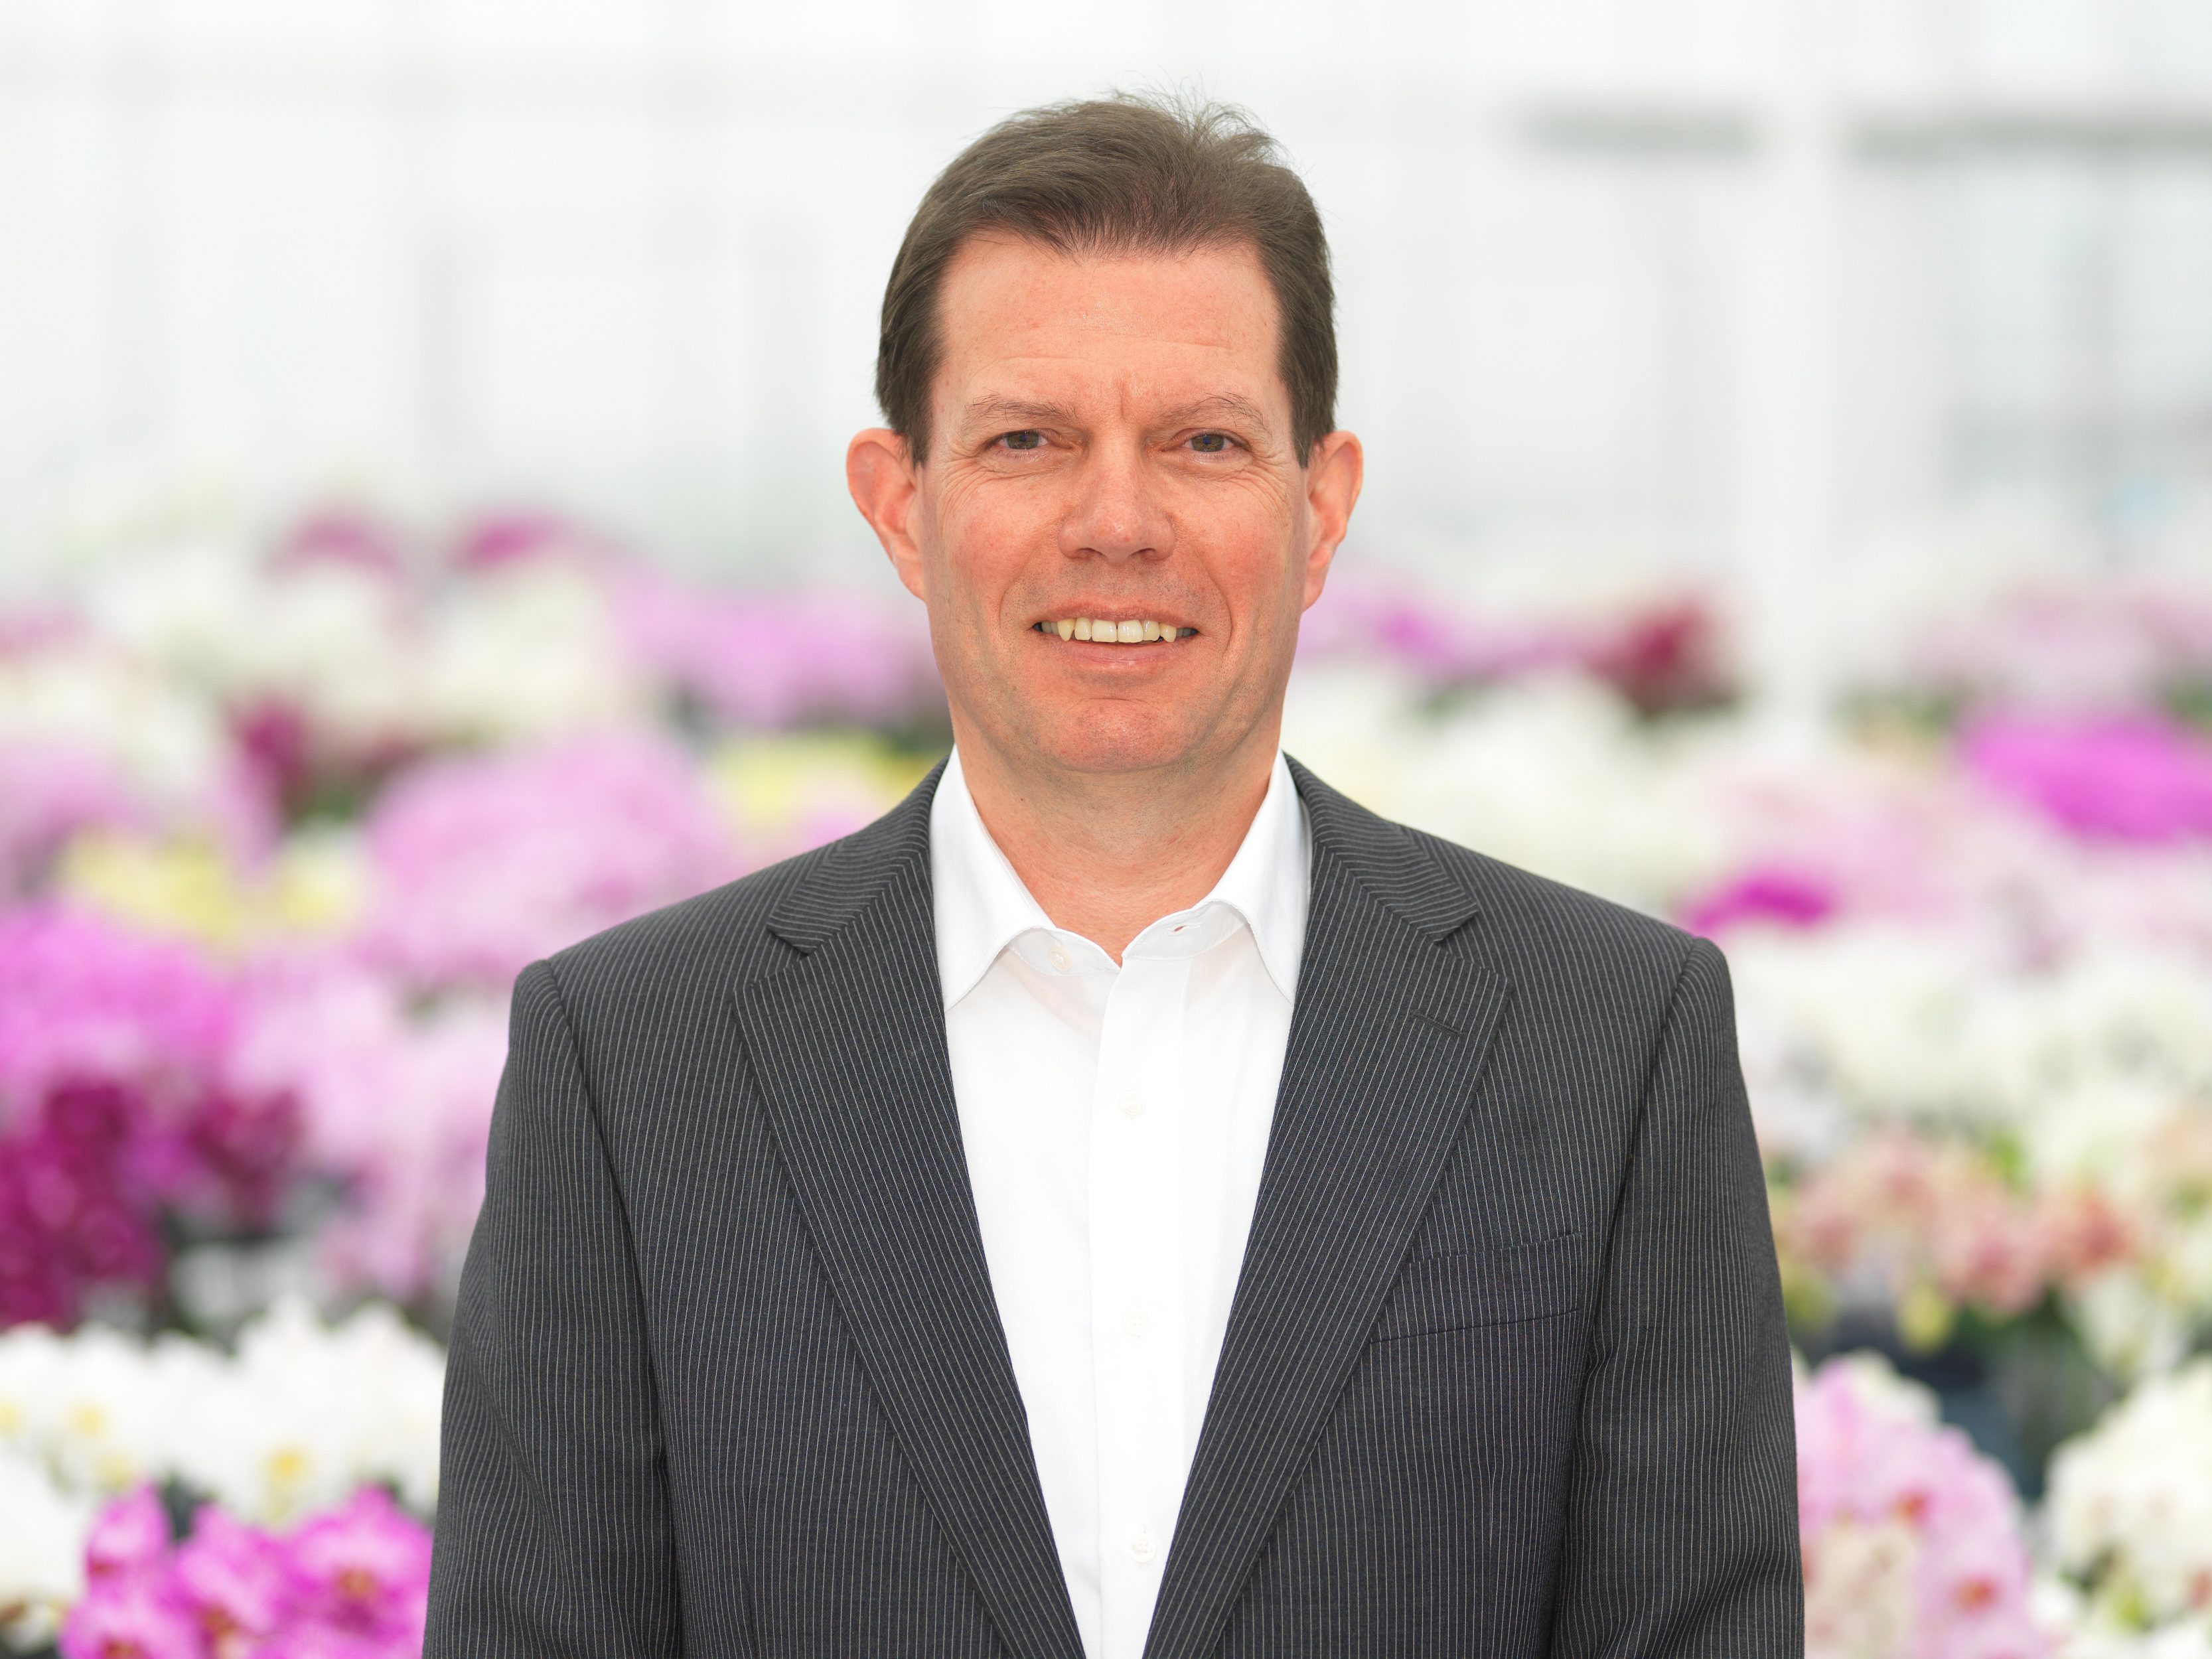 Rick Kroon, Commercial Manager Export